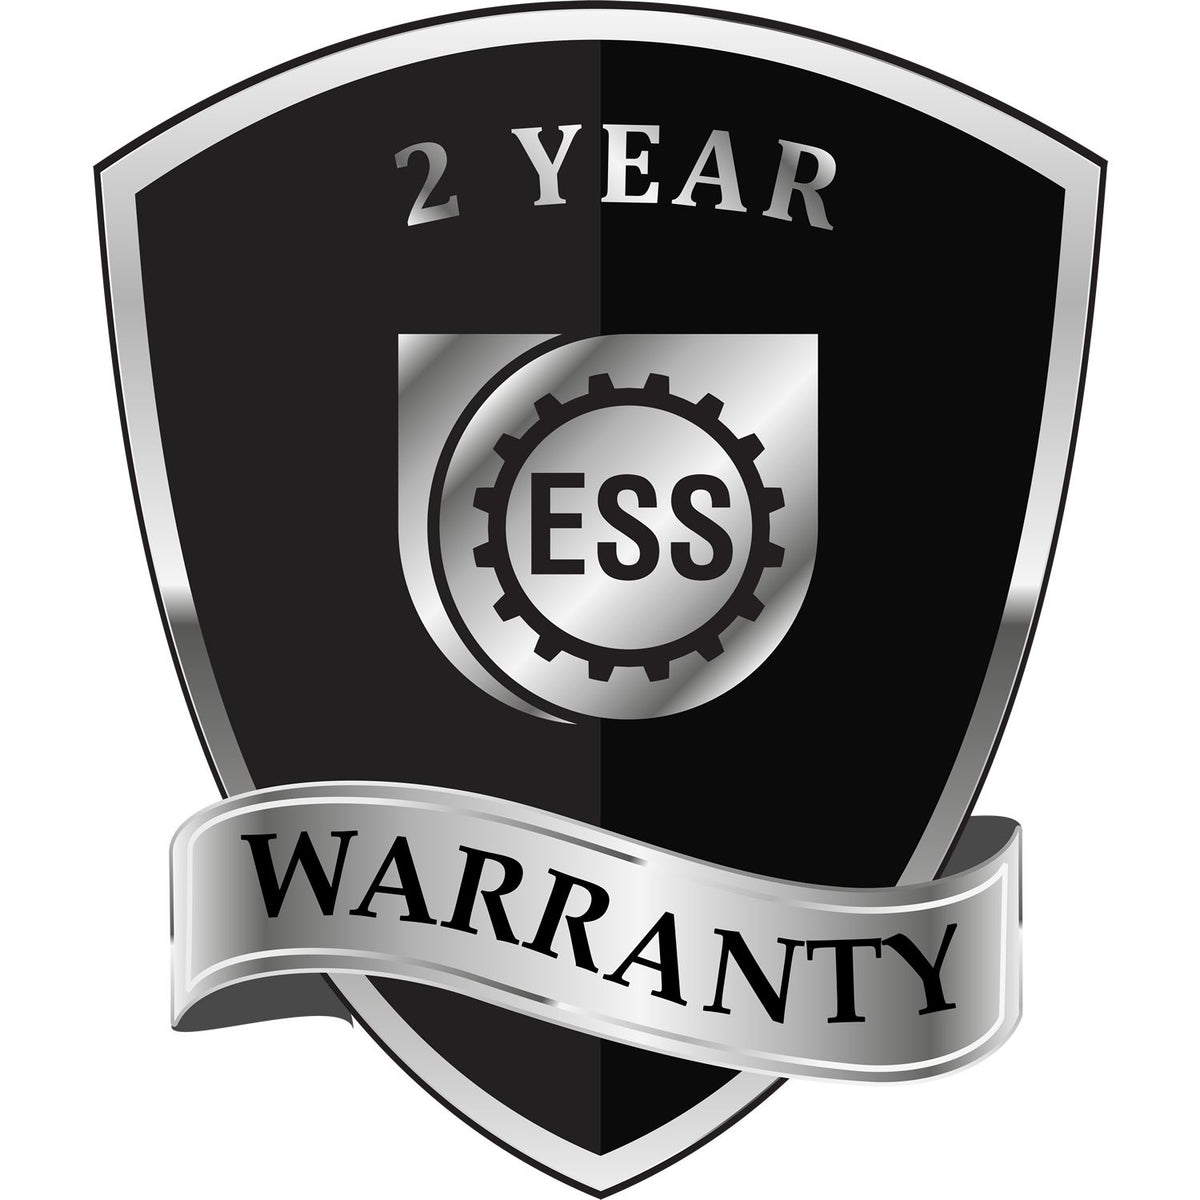 A badge or emblem showing a warranty icon for the Michigan Engineer Desk Seal